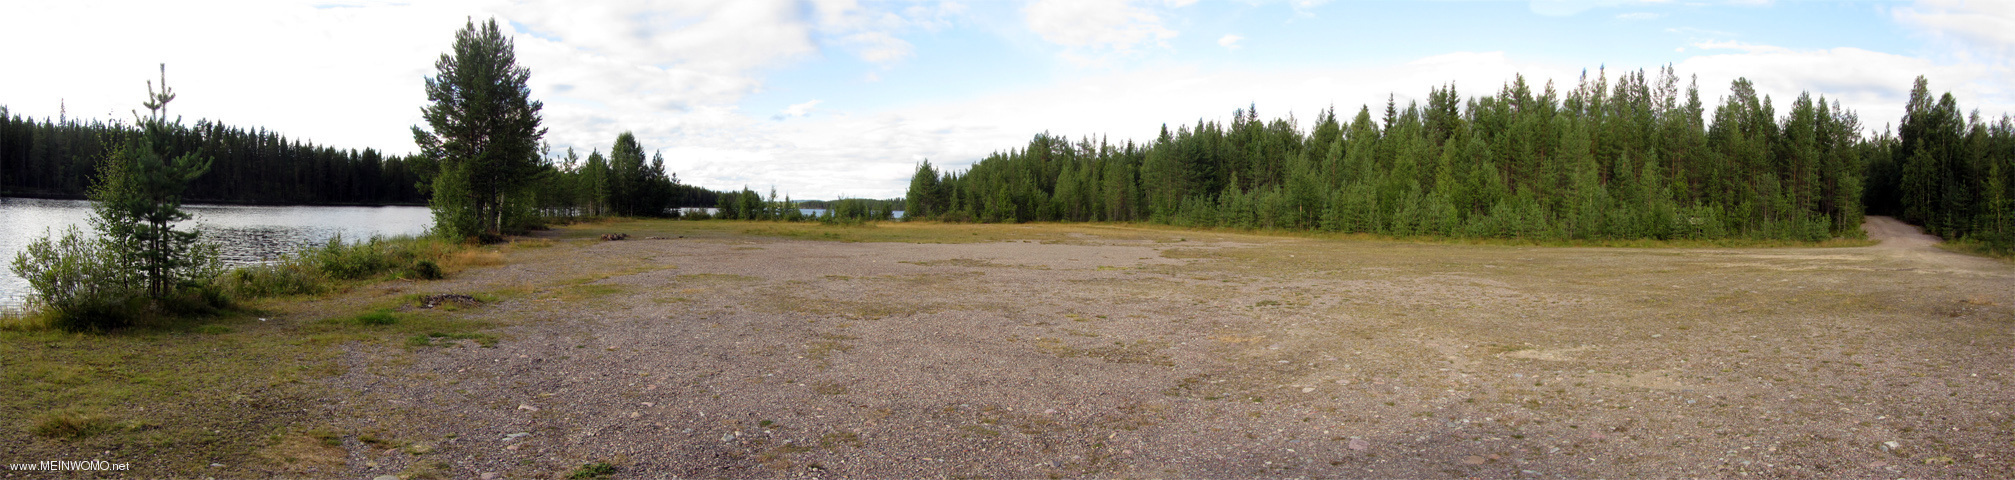  Parking space at Bornsjn, overview of the entire place - right is still the driveway towards the  ...